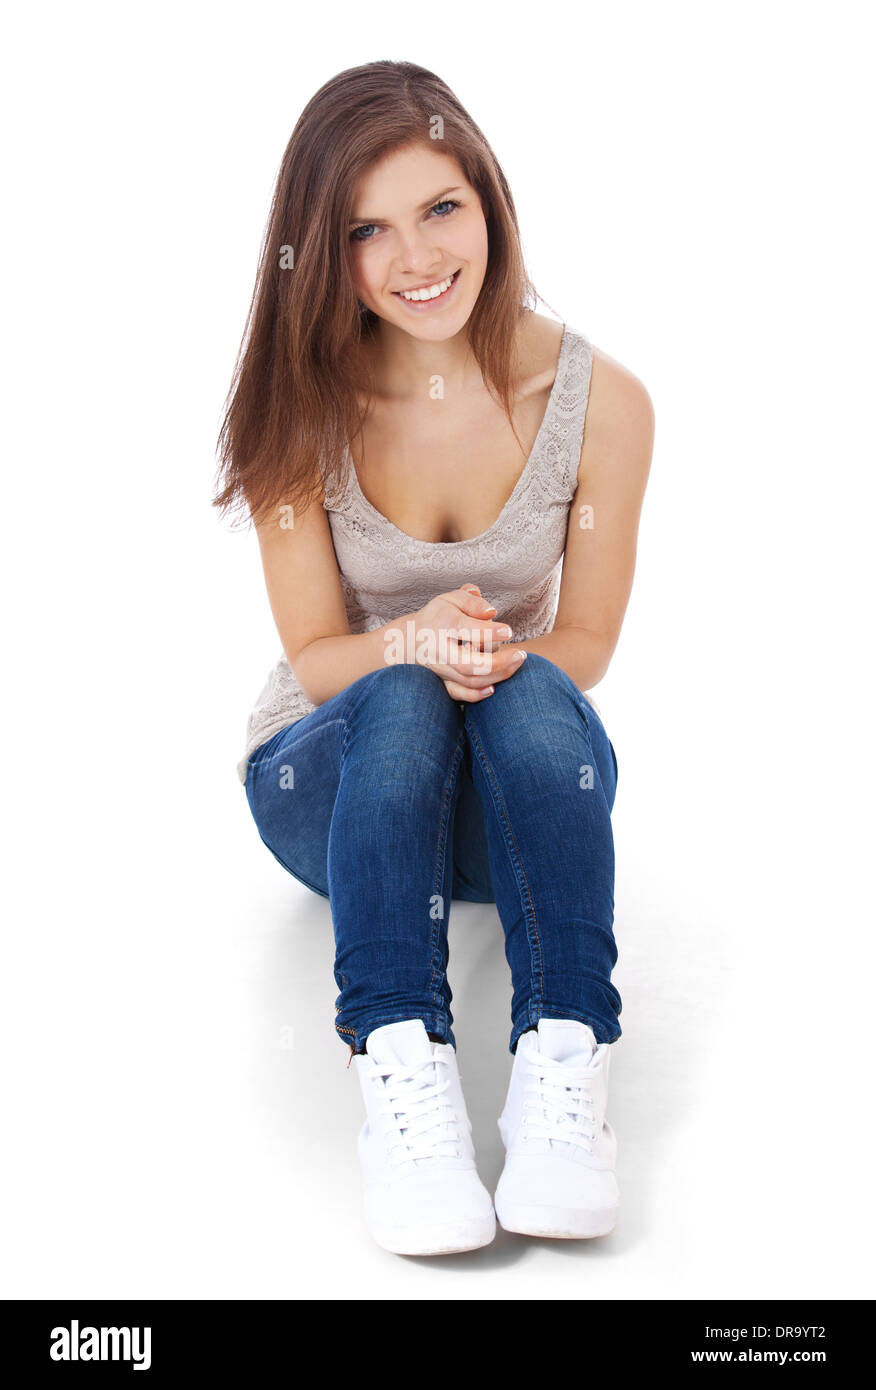 Attractive teenage girl. All on white background Stock Photo - Alamy